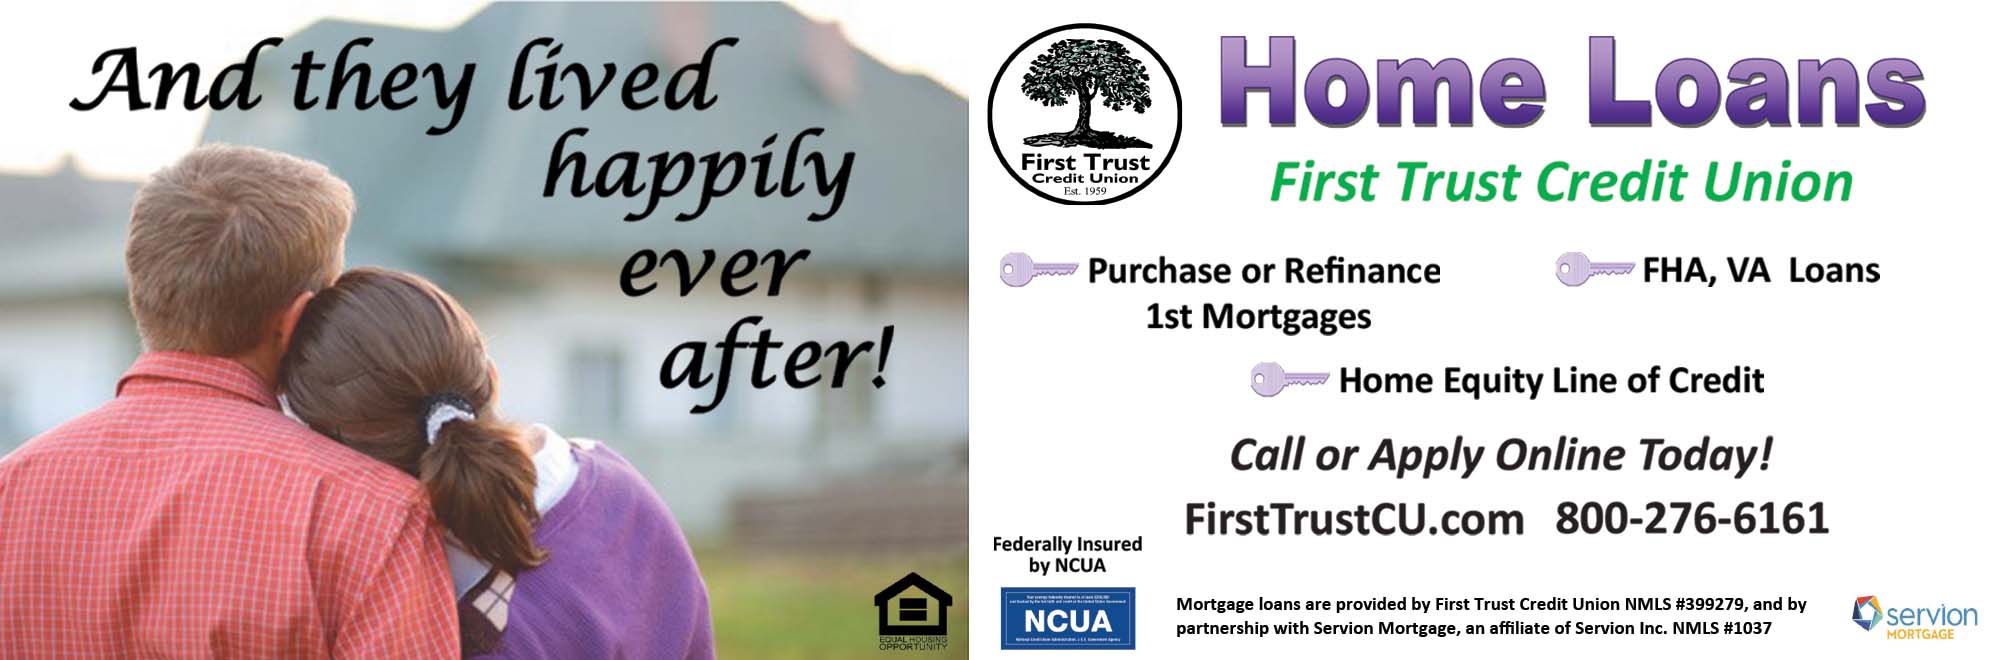 First Trust Home Loans